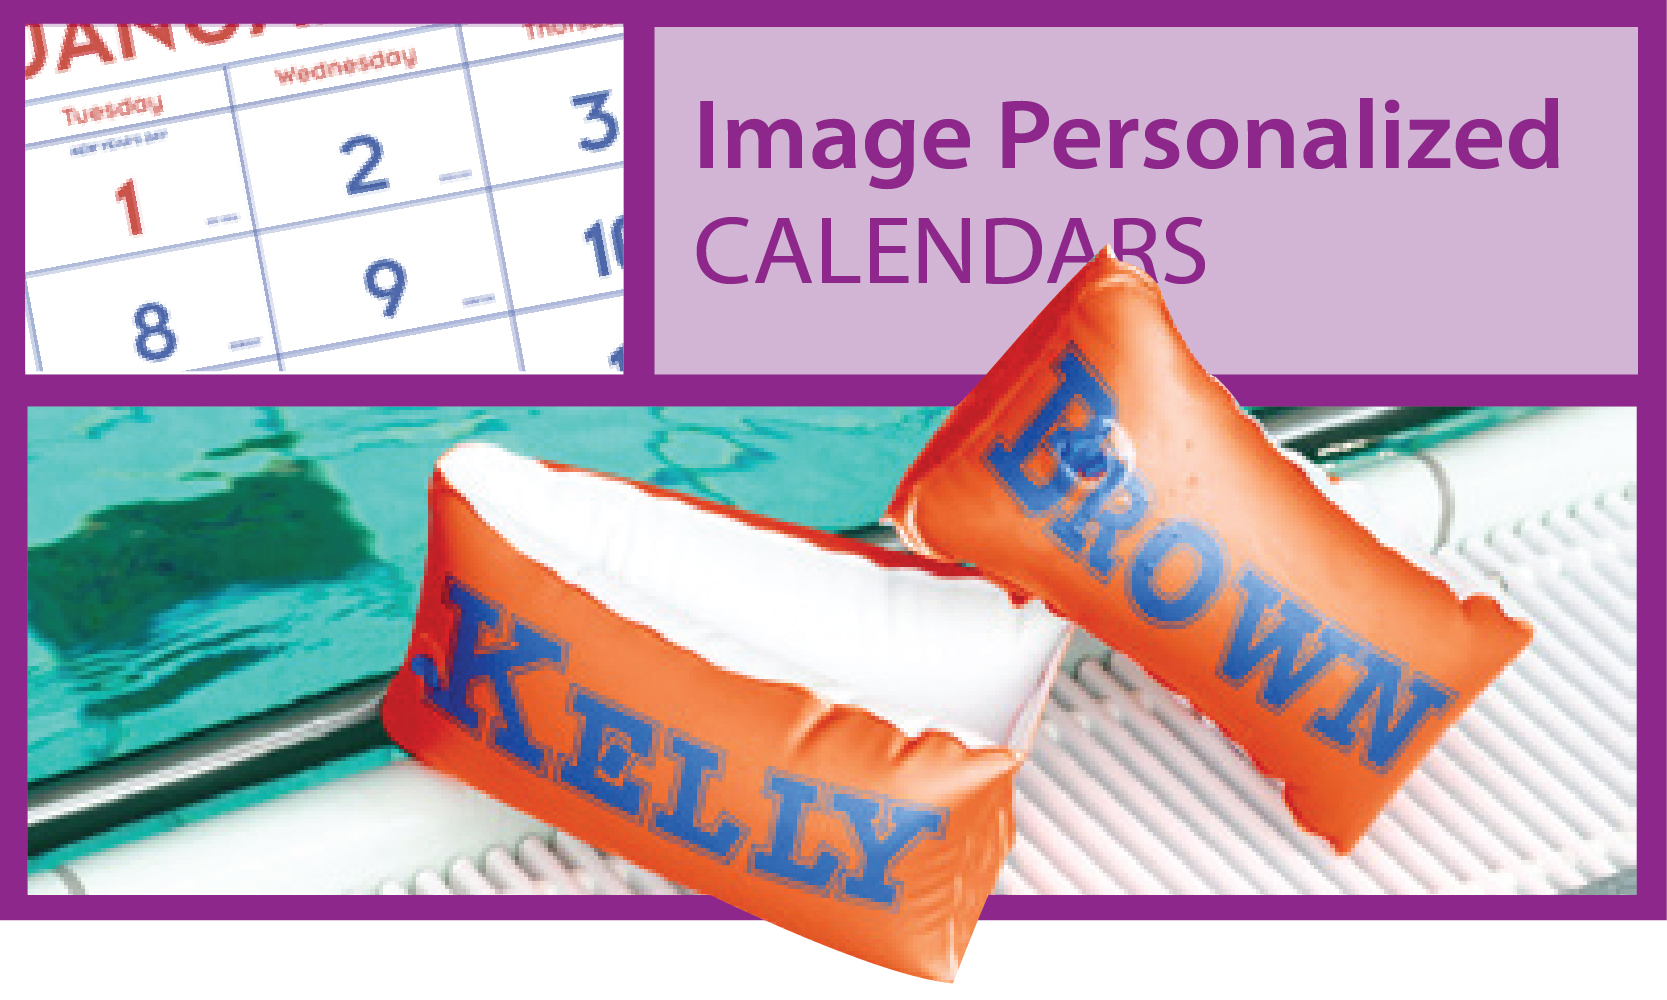 Image Personalized Name Desk Tent Calendars Image Personalized